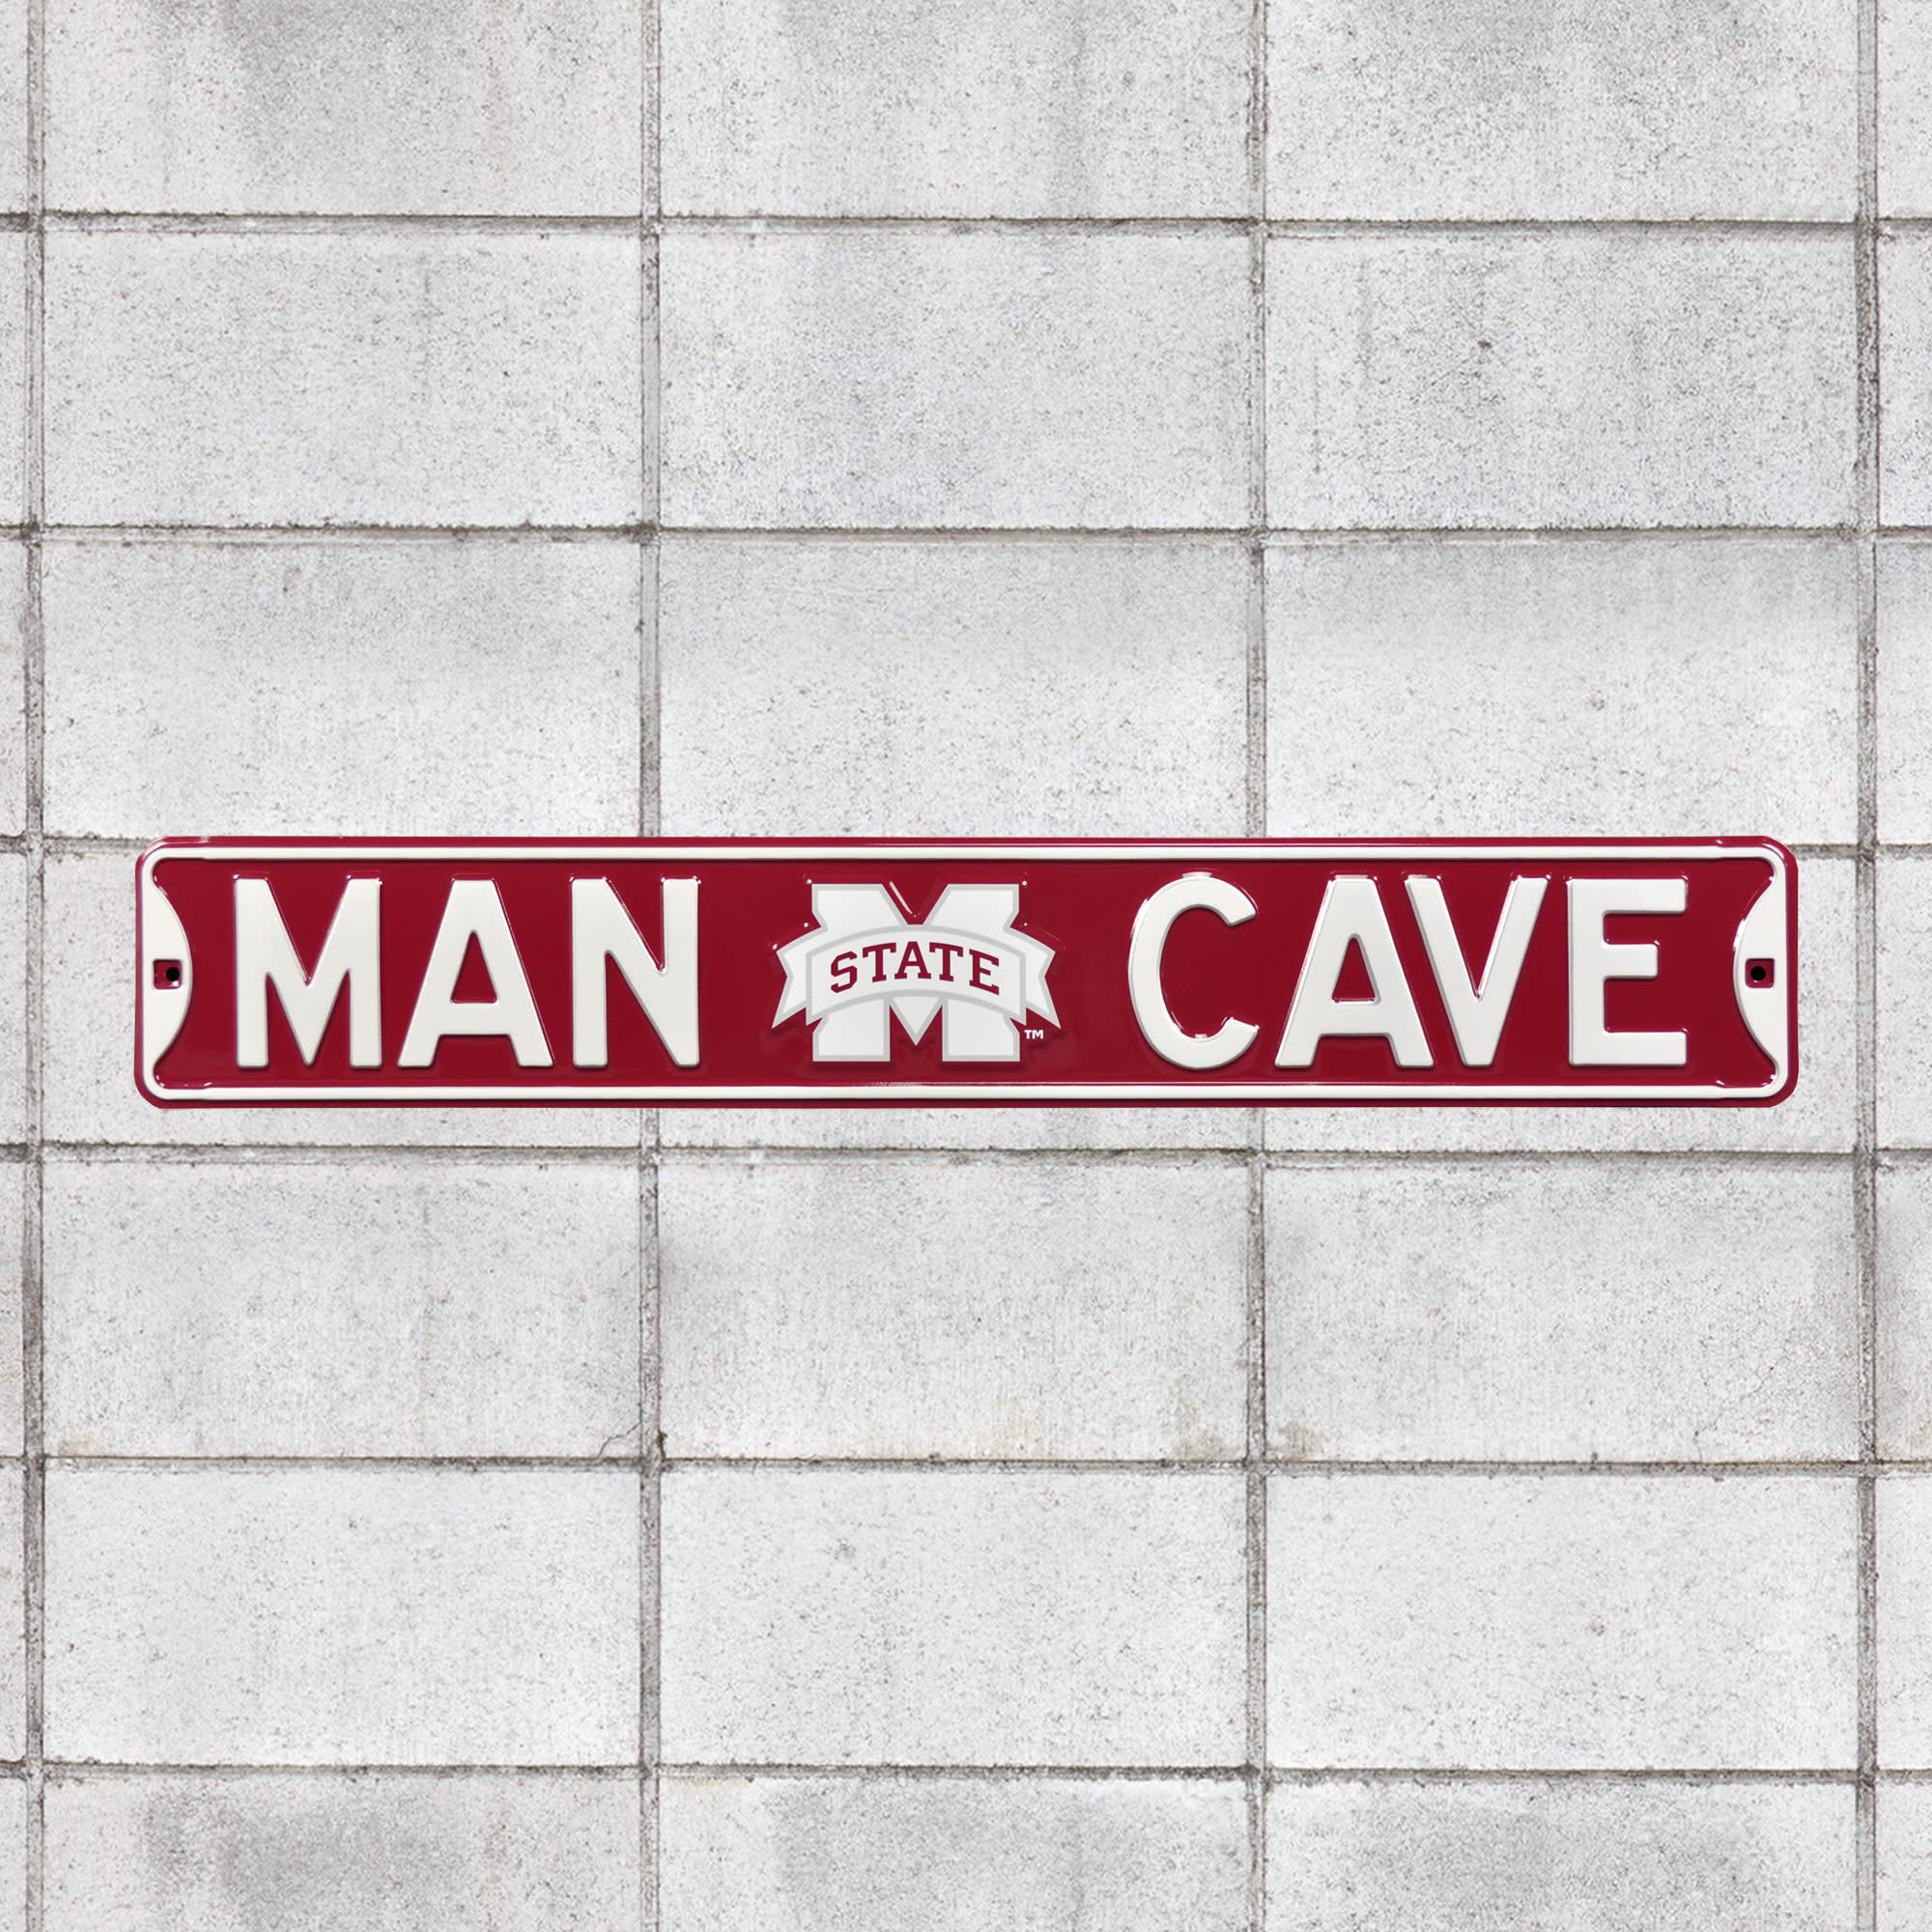 Mississippi State Bulldogs: Man Cave - Officially Licensed Metal Street Sign 36.0"W x 6.0"H by Fathead | 100% Steel